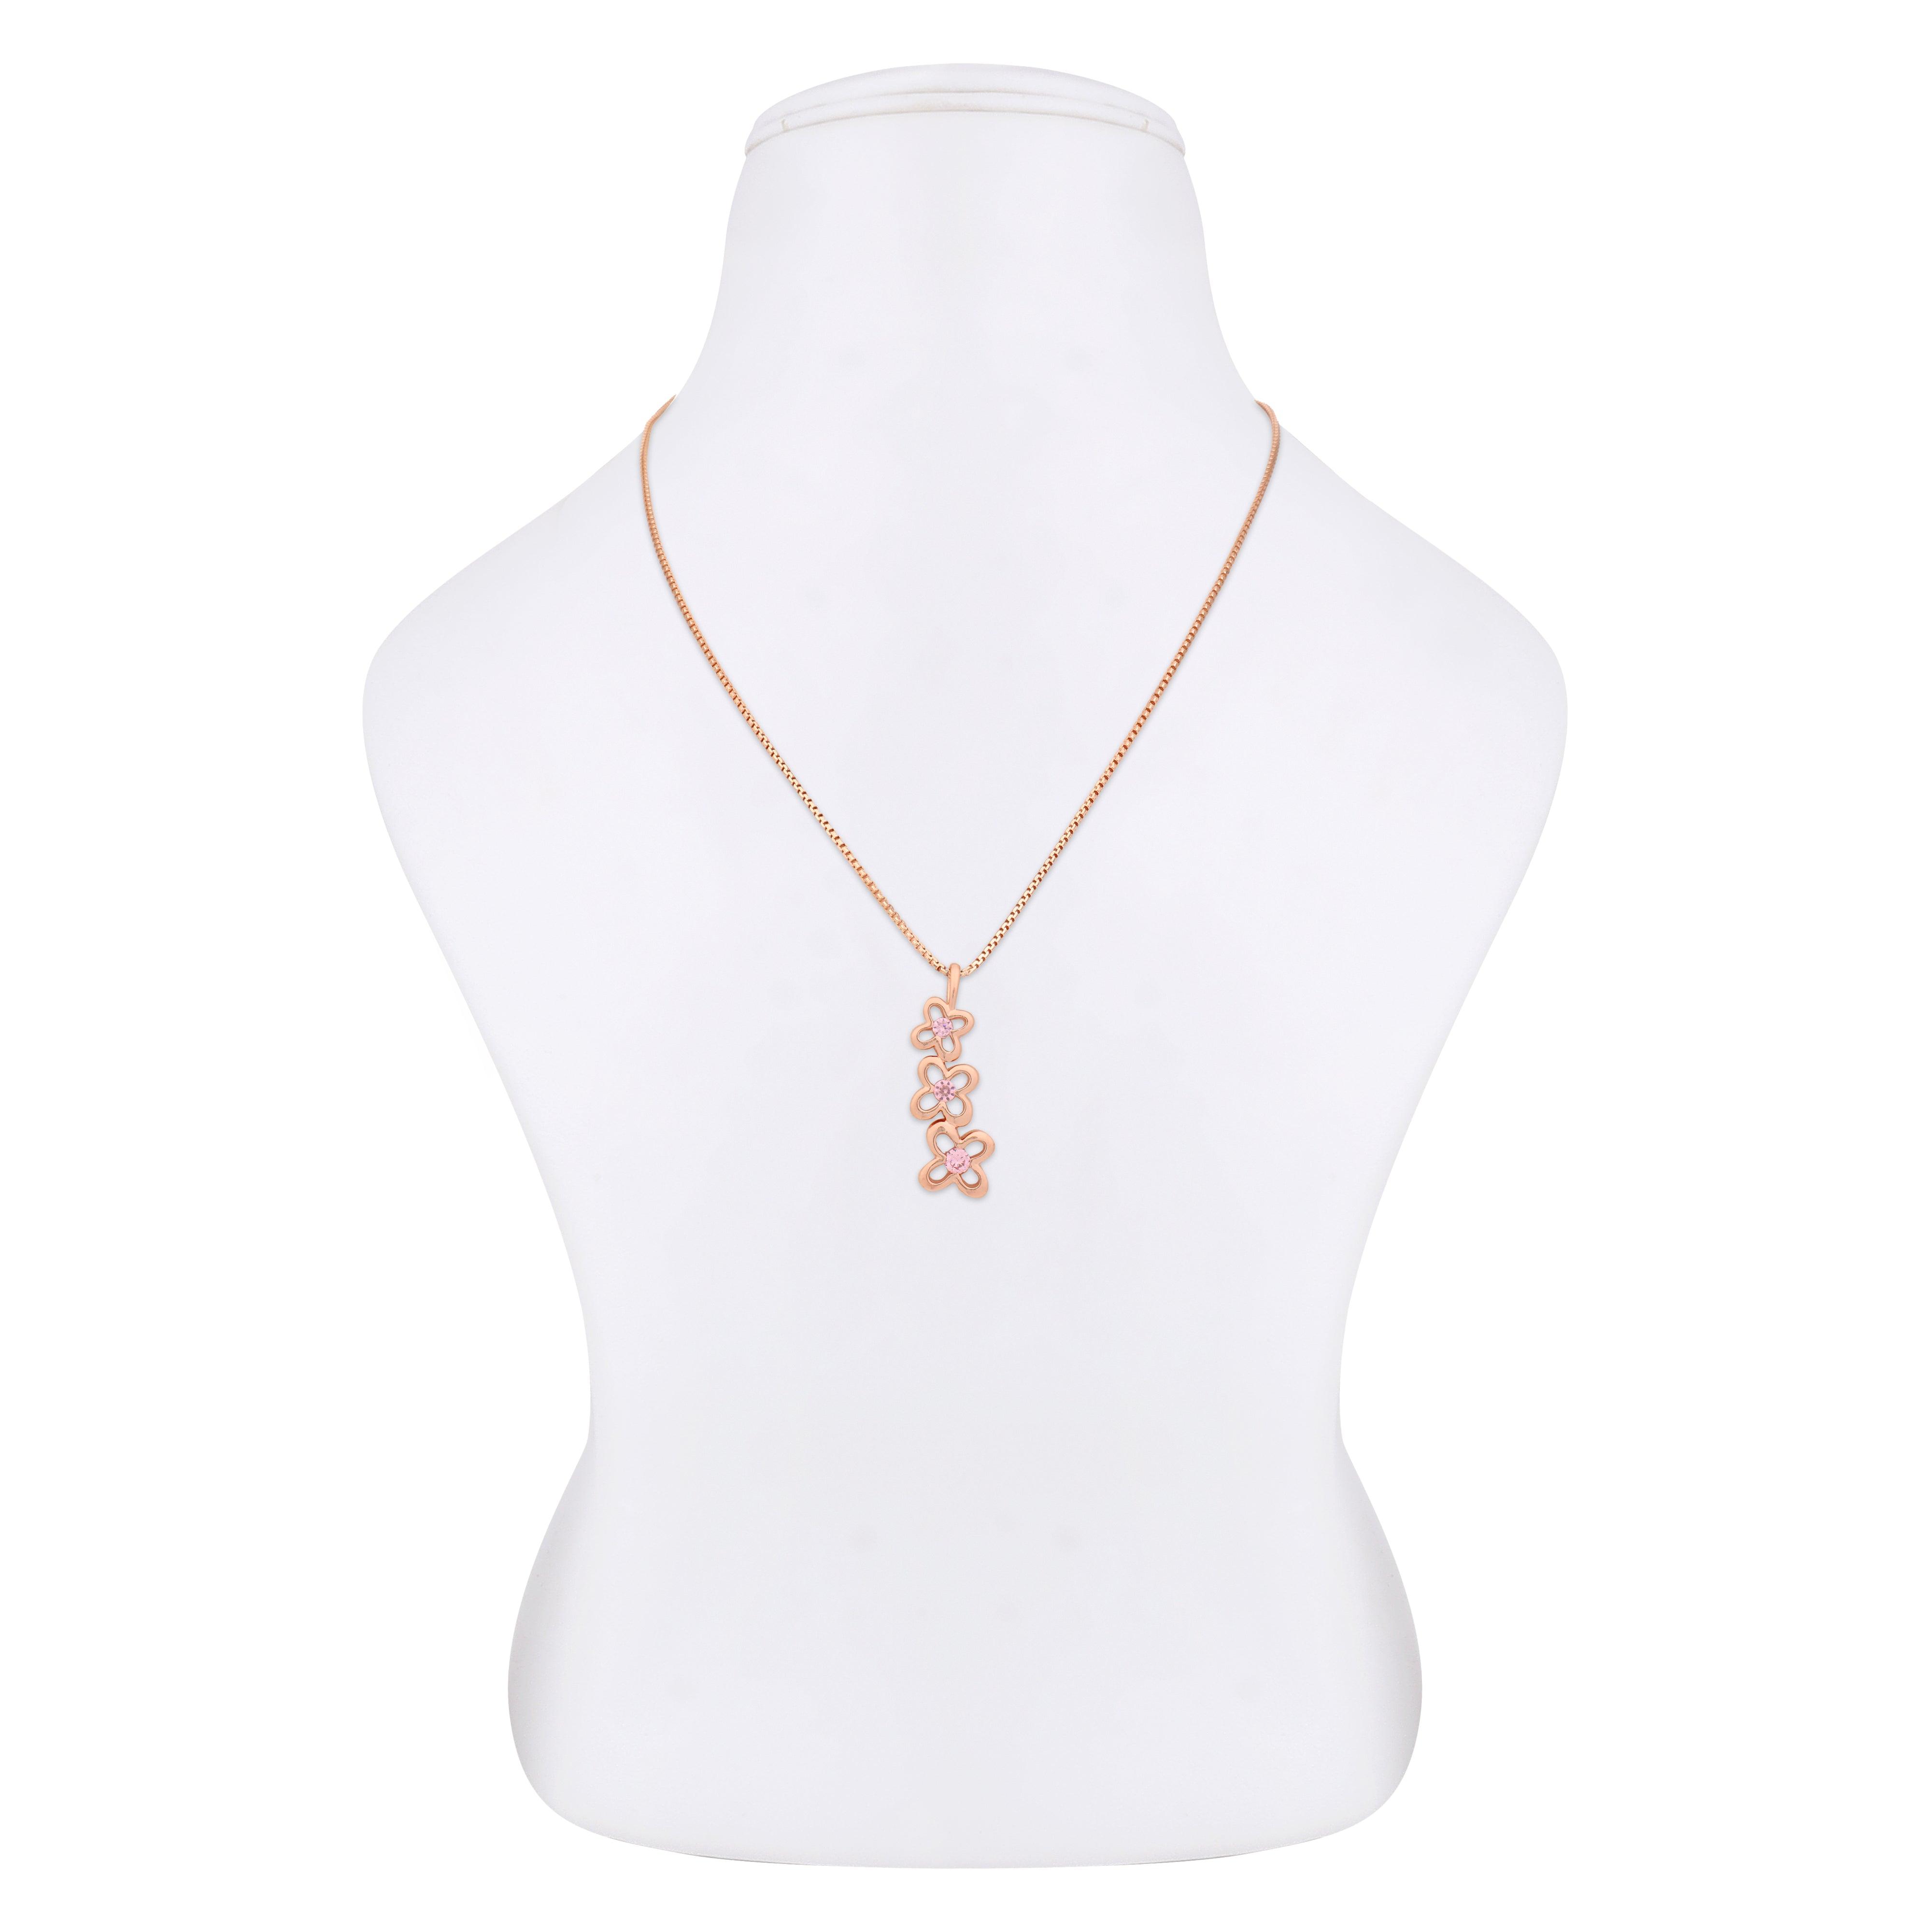 Trio Clover Sterling Silver Necklace - Diavo Jewels